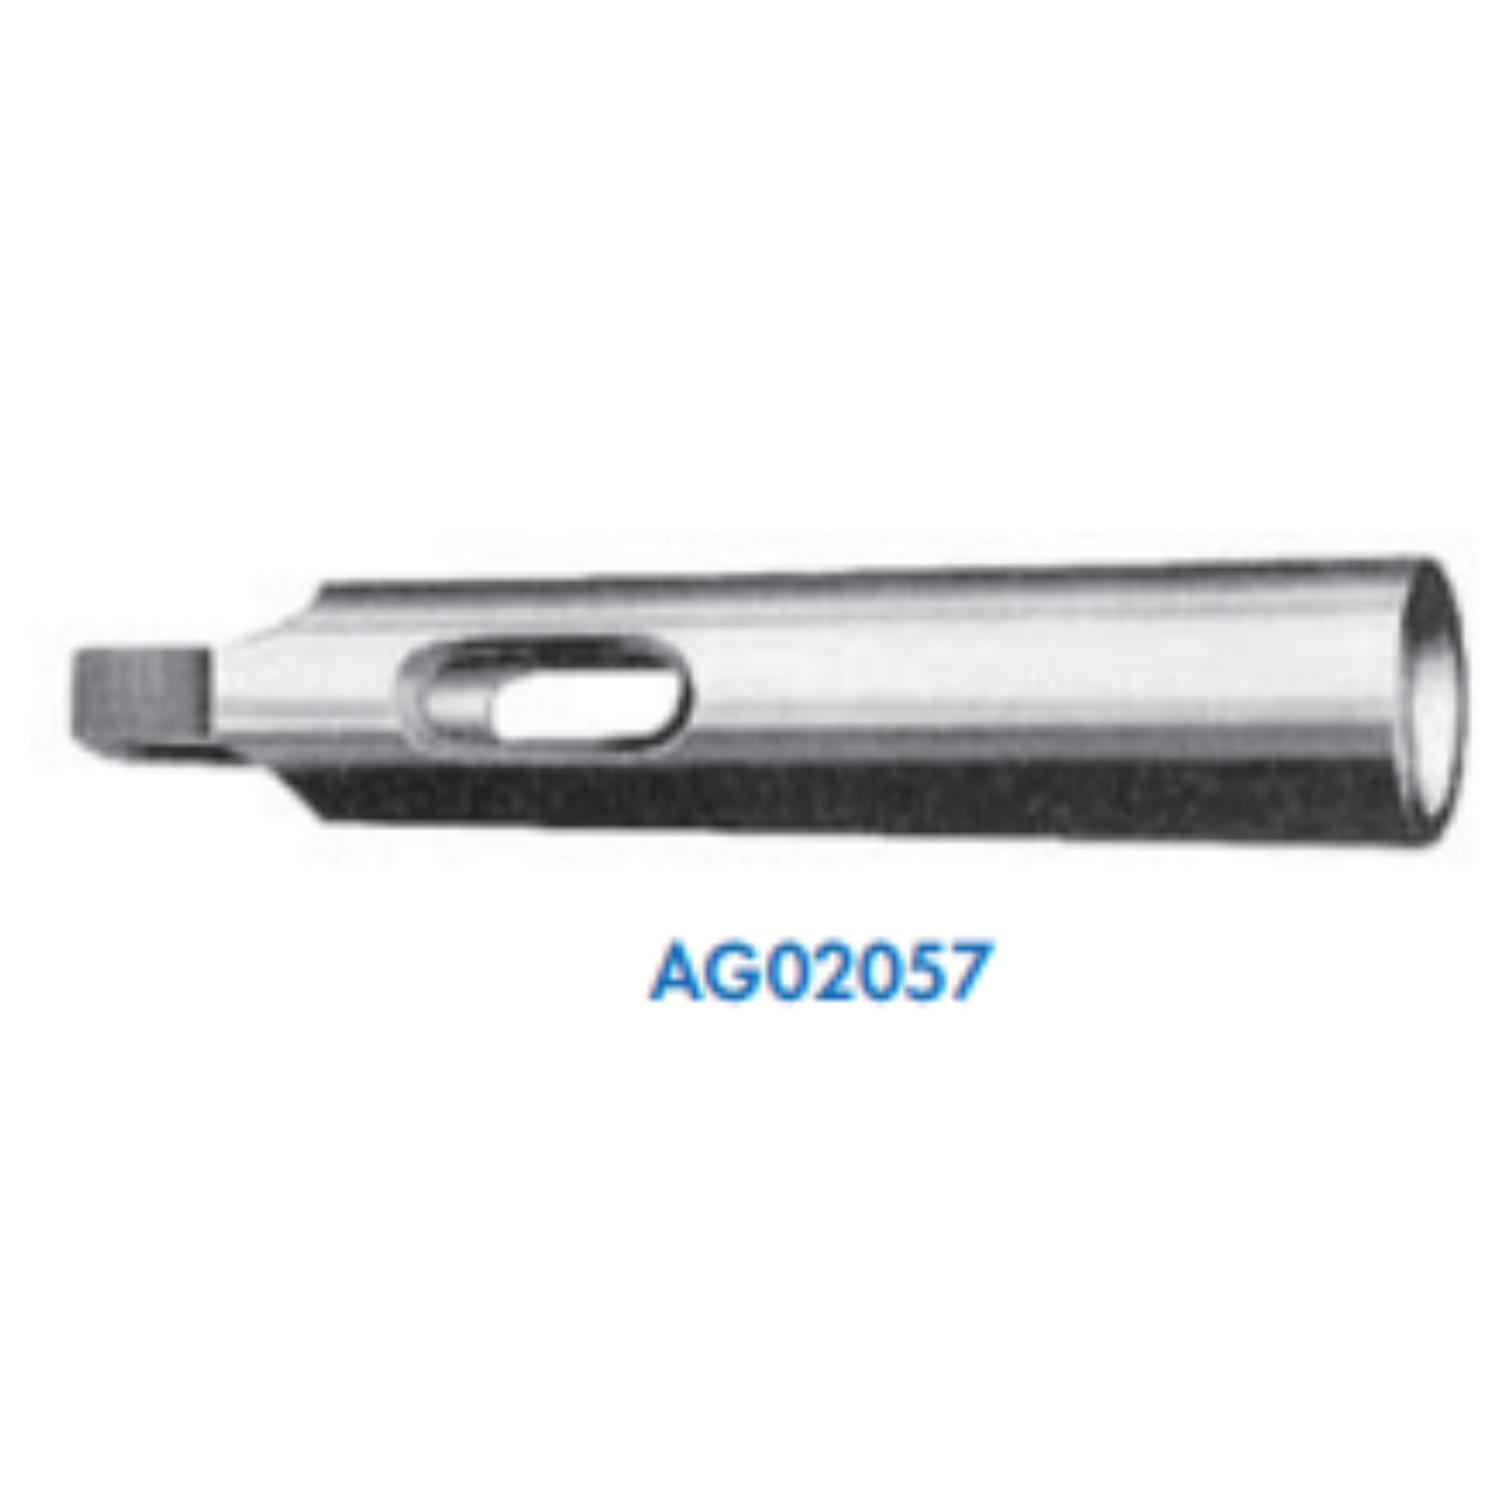 YEW AIK AG02057 - AG02067 General Cutting Tools Drill Sleeve - Premium Drill Sleeve from YEW AIK - Shop now at Yew Aik.